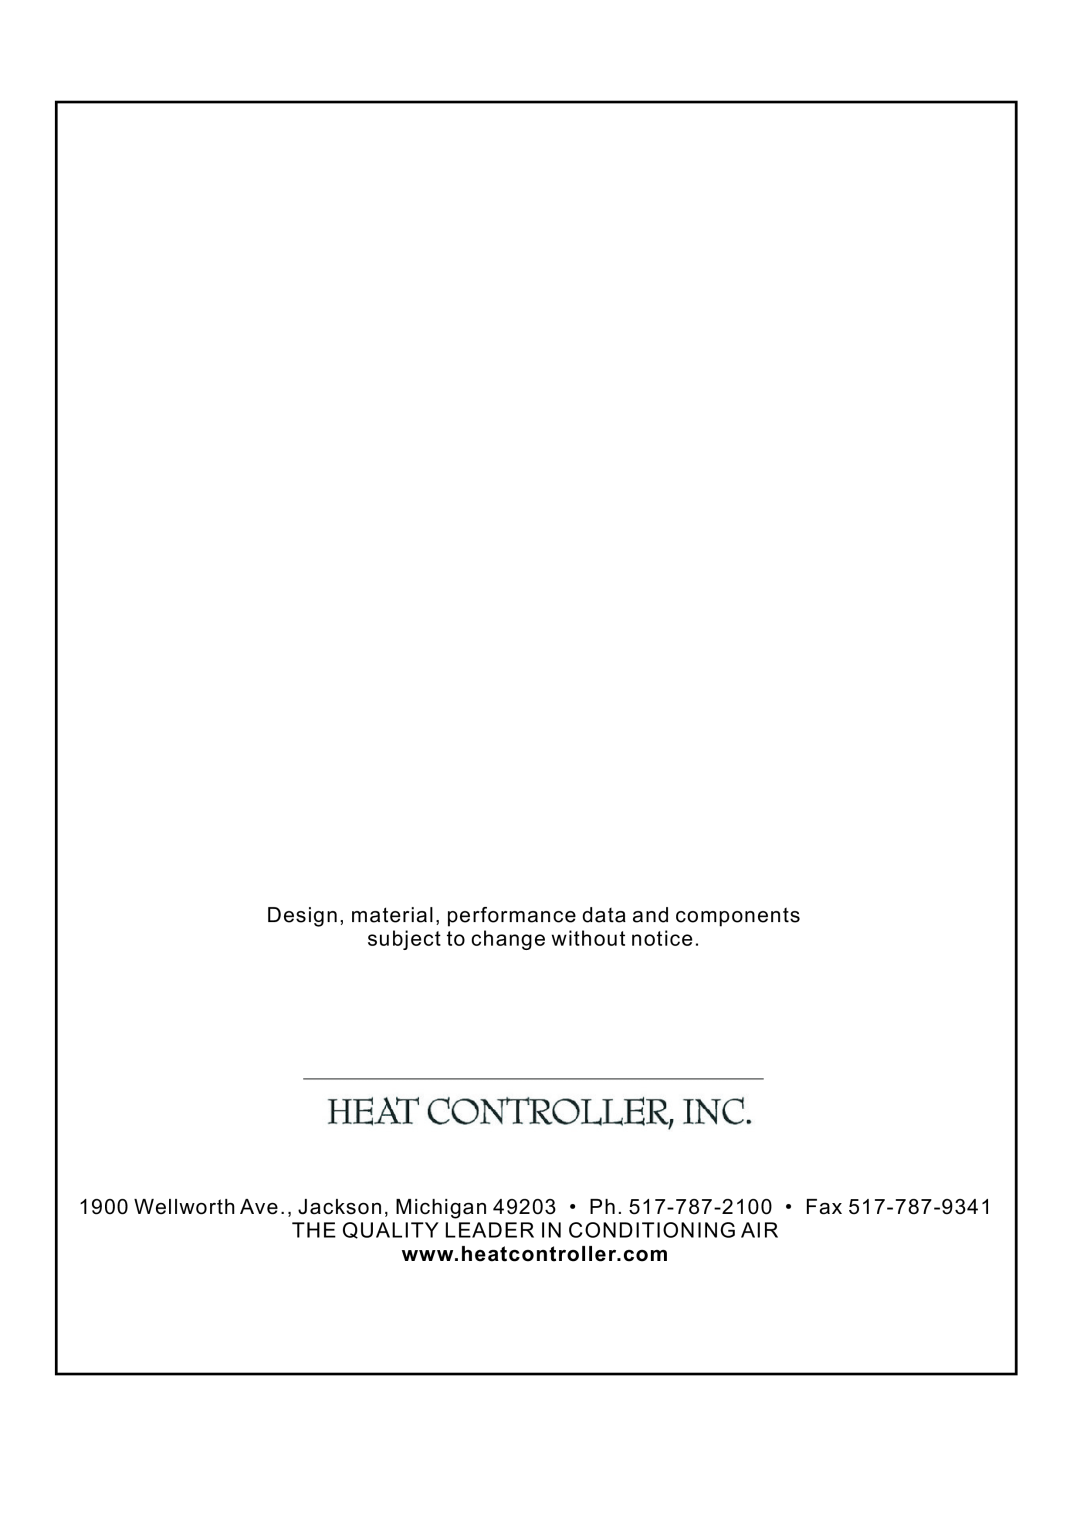 Heat Controller SMH, SMA Design, aterial, erformance ata nd omponents, subject o hange ithout otice, Ph. 17-787-2100Fax 